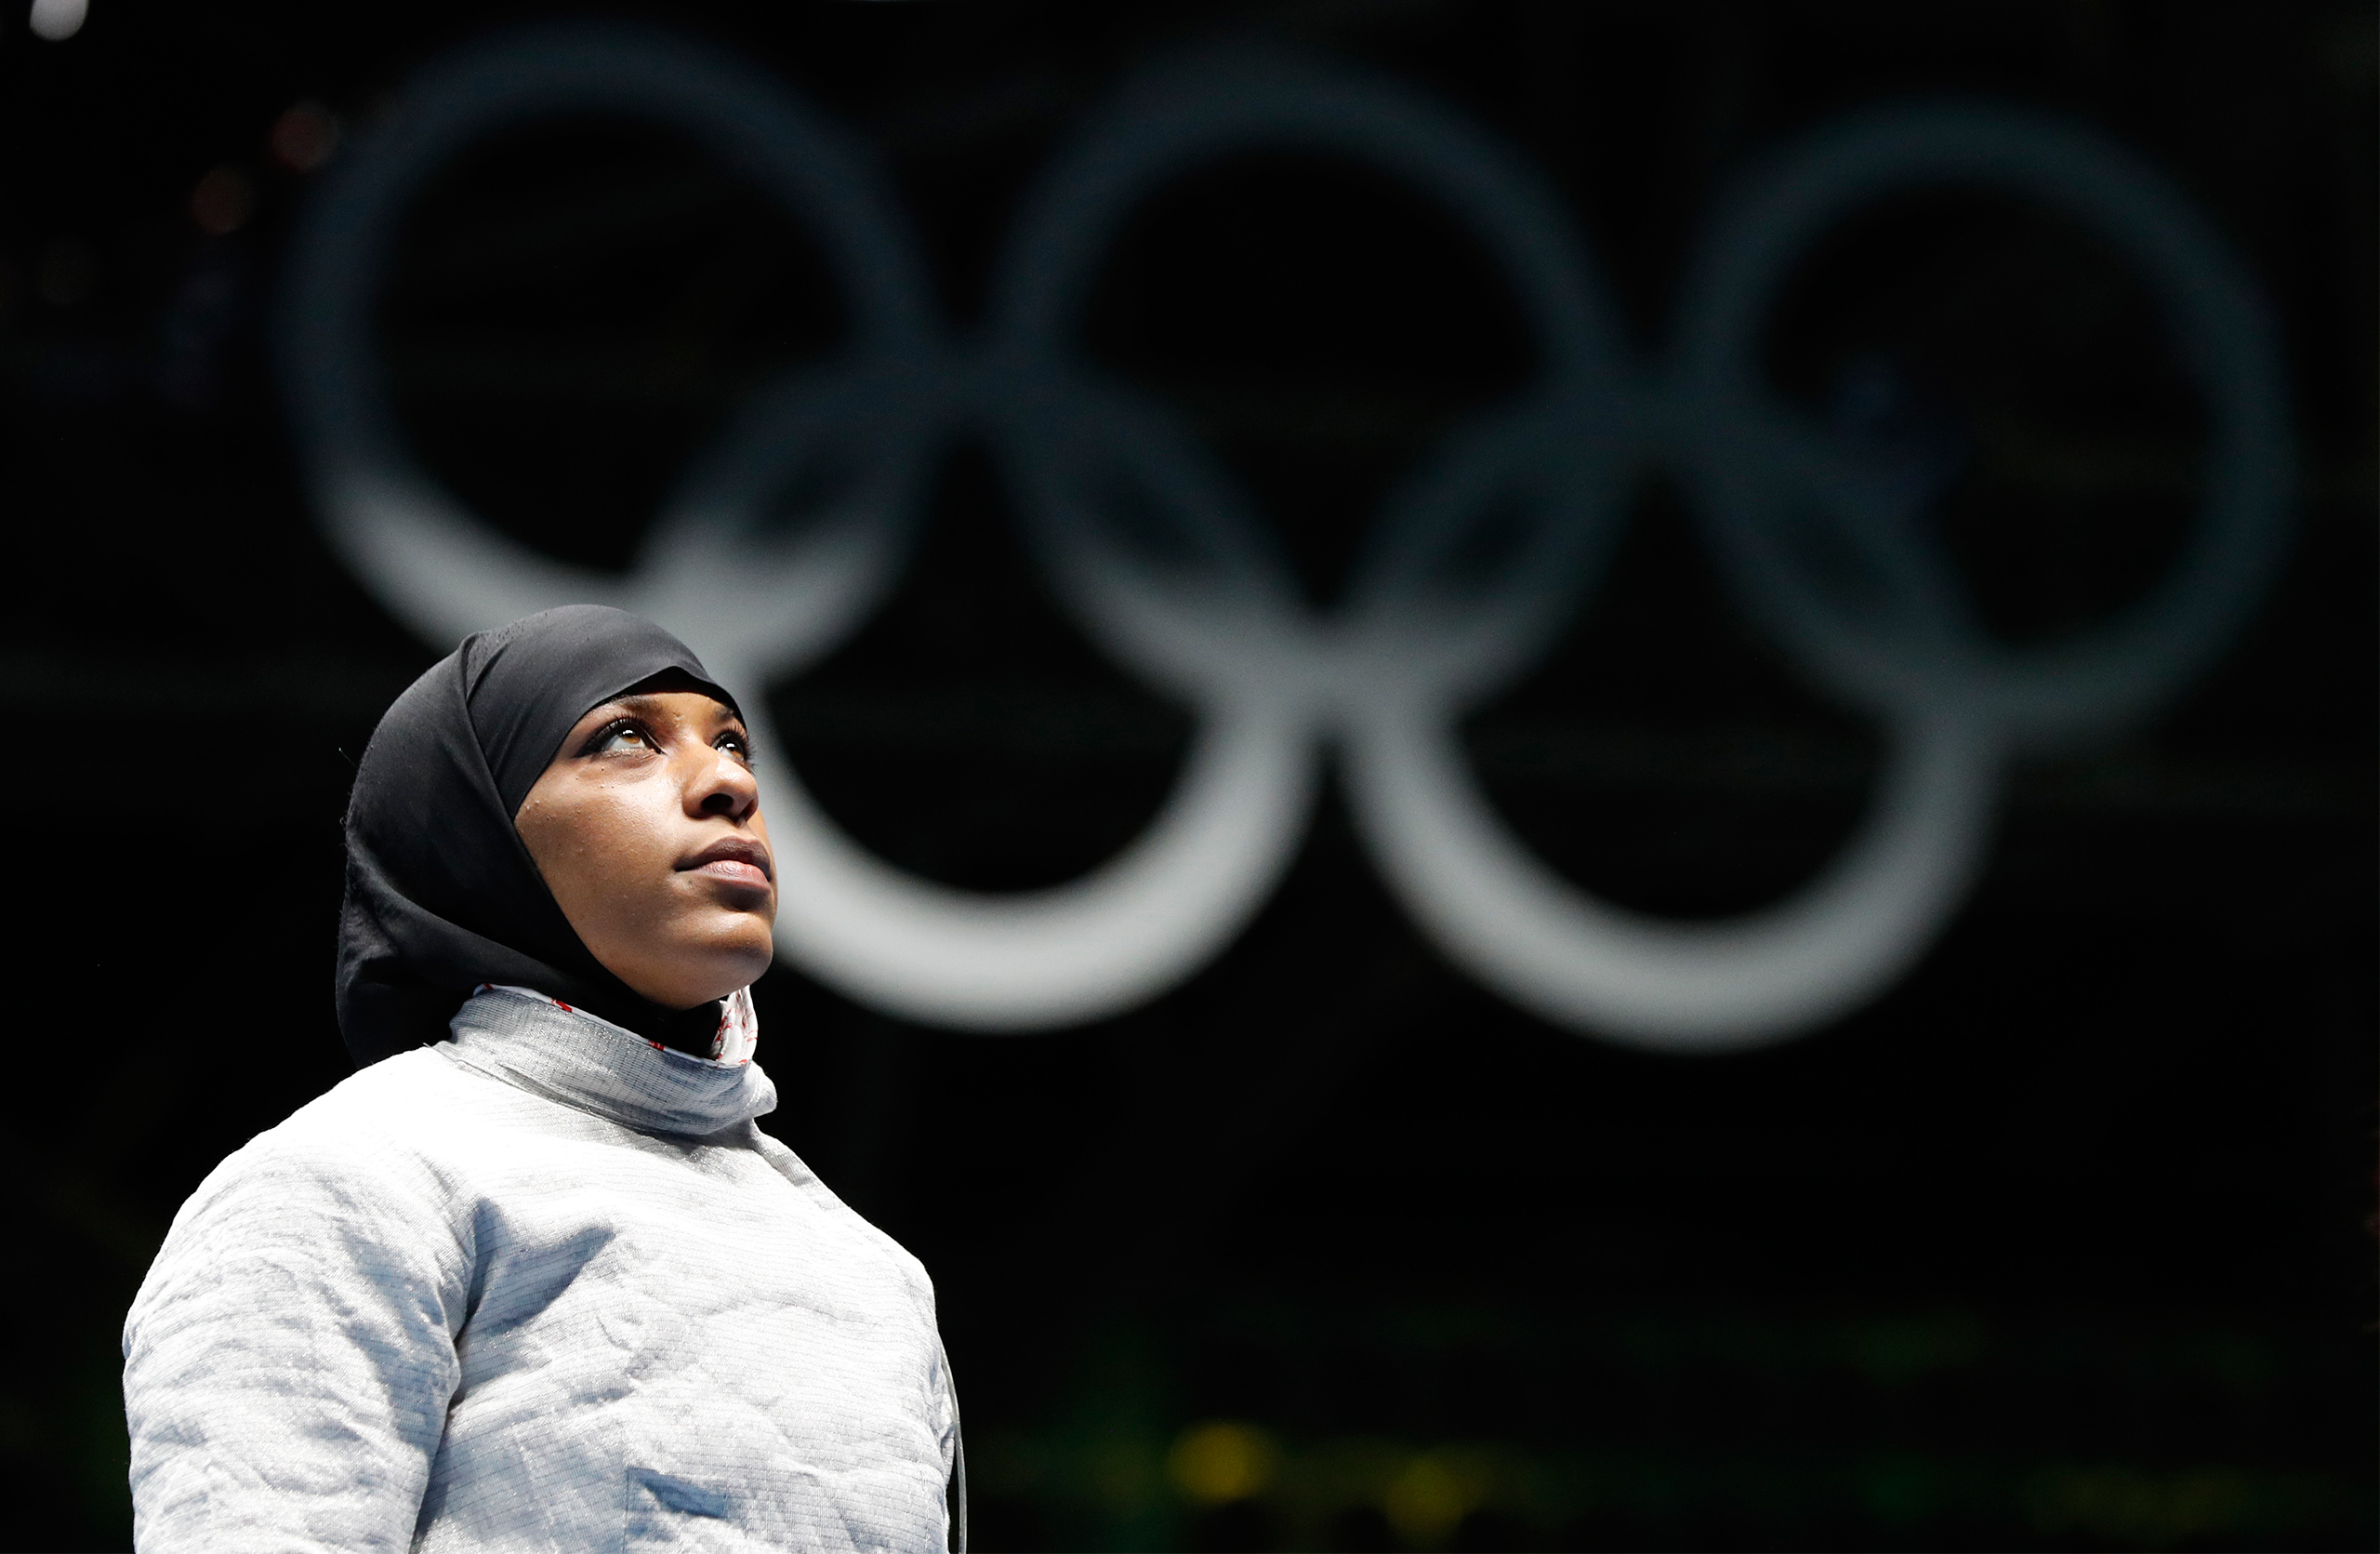 Ibtihaj Muhammad waits for a match against Olena Kravatska of Ukraine, in the women's saber individual fencing event at the Summer Olympics in Rio de Janeiro on Aug. 8, 2016. (Vincent Thian—AP)